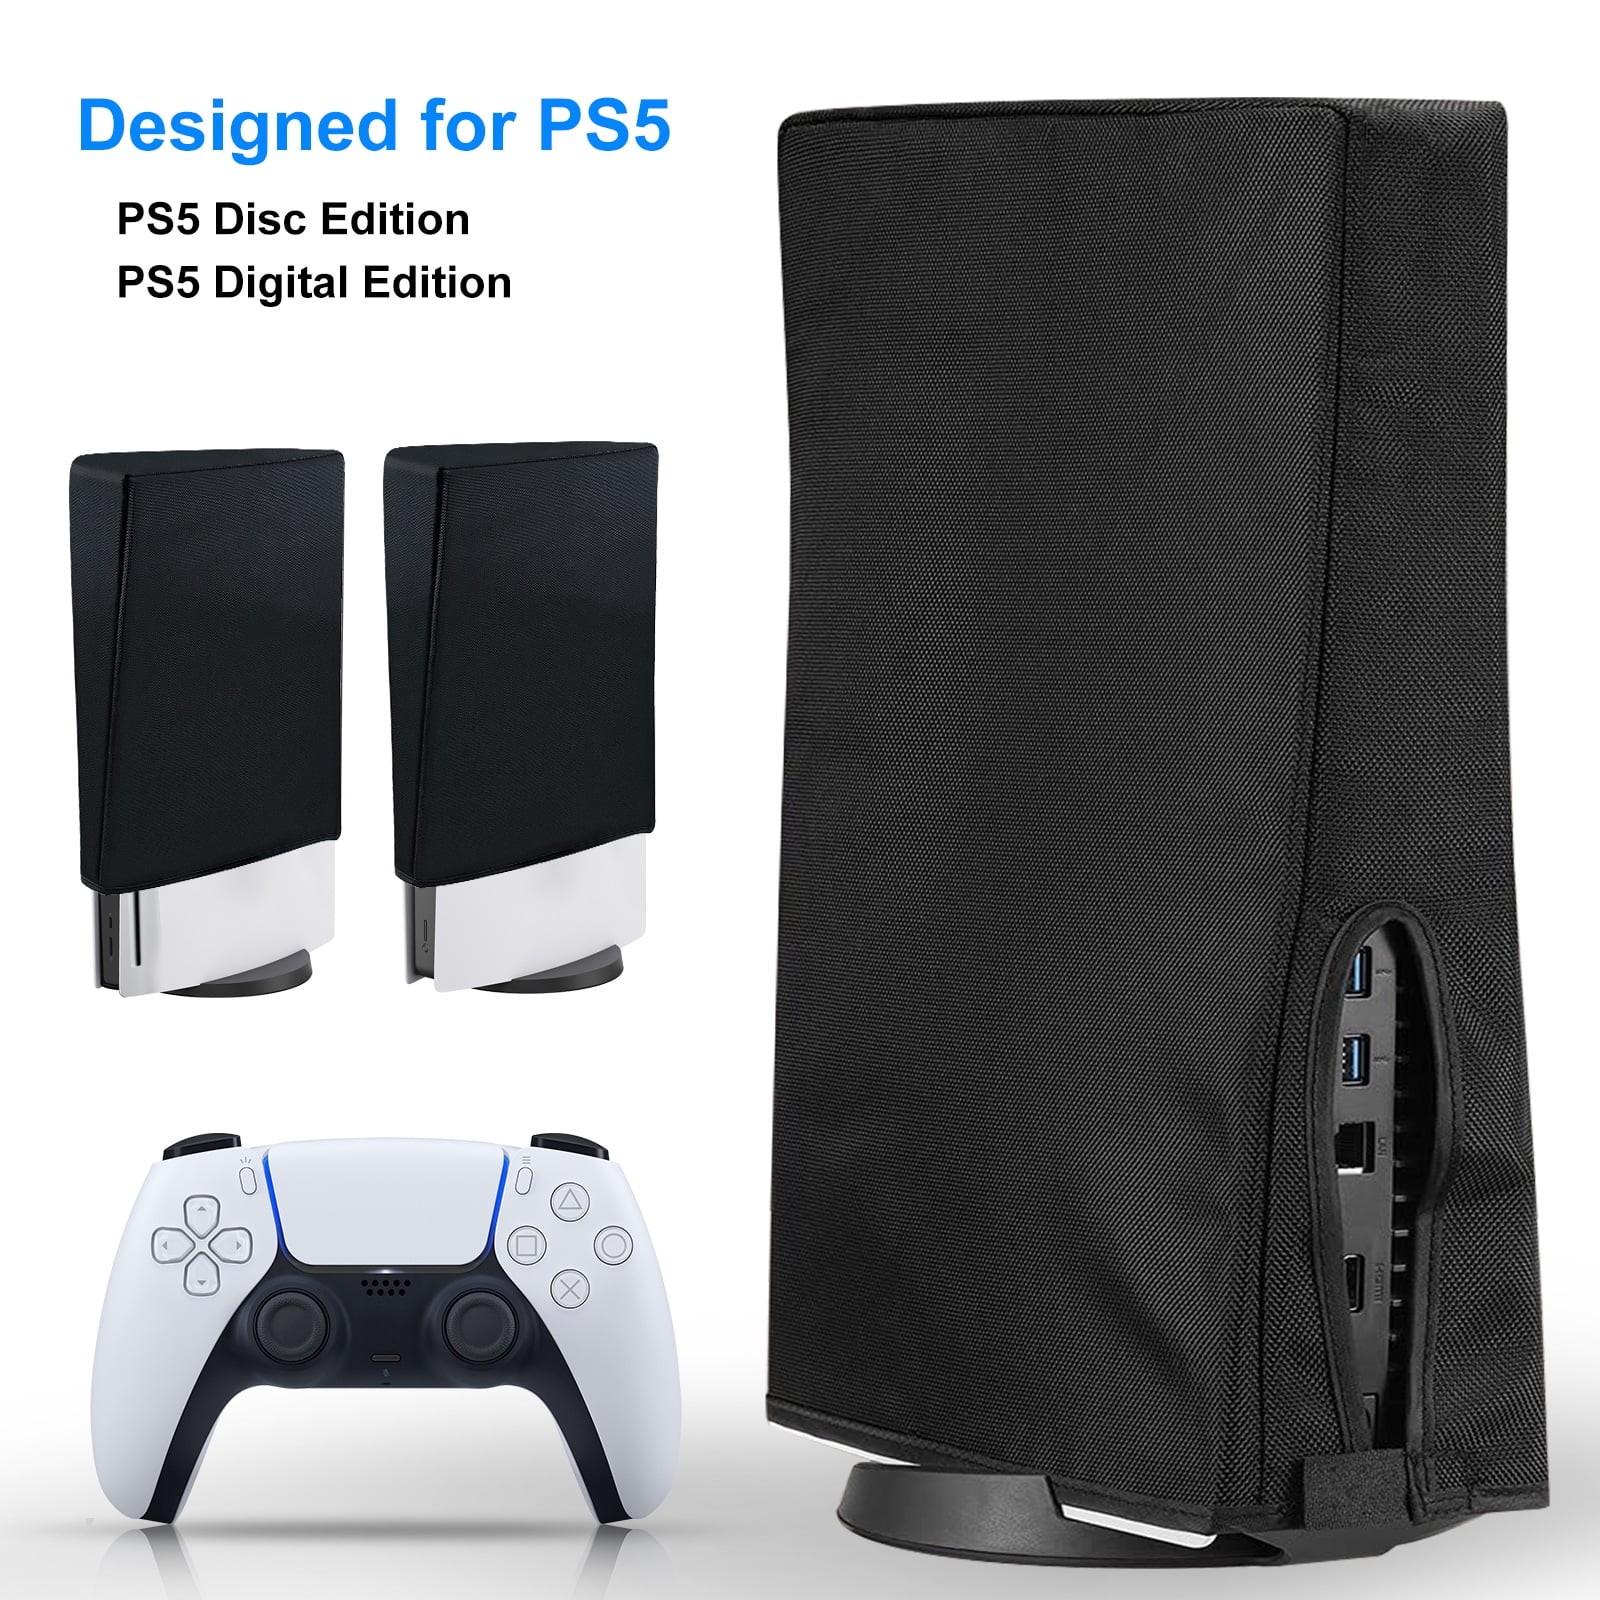 Black Protective Case Dust Sleeve Playstation 5 Digital Edition and Regular Edition Dust Cover for PS5 Console Waterproof Anti Scratch Fabric,Easy Access Cable Port 